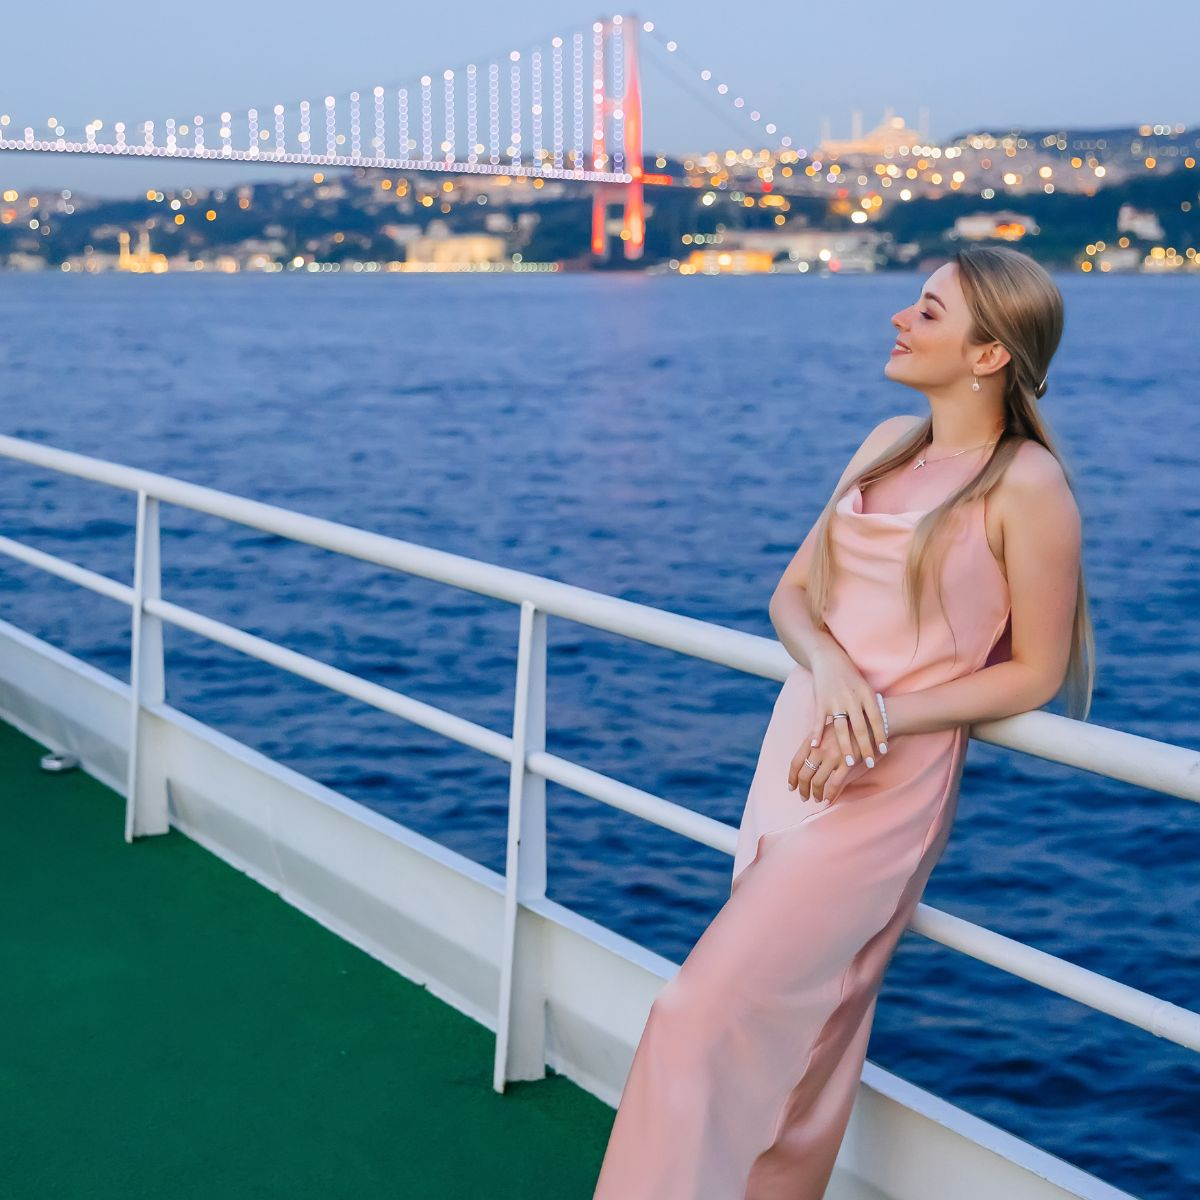 Evening Chic outfit for Celebrity Cruises 